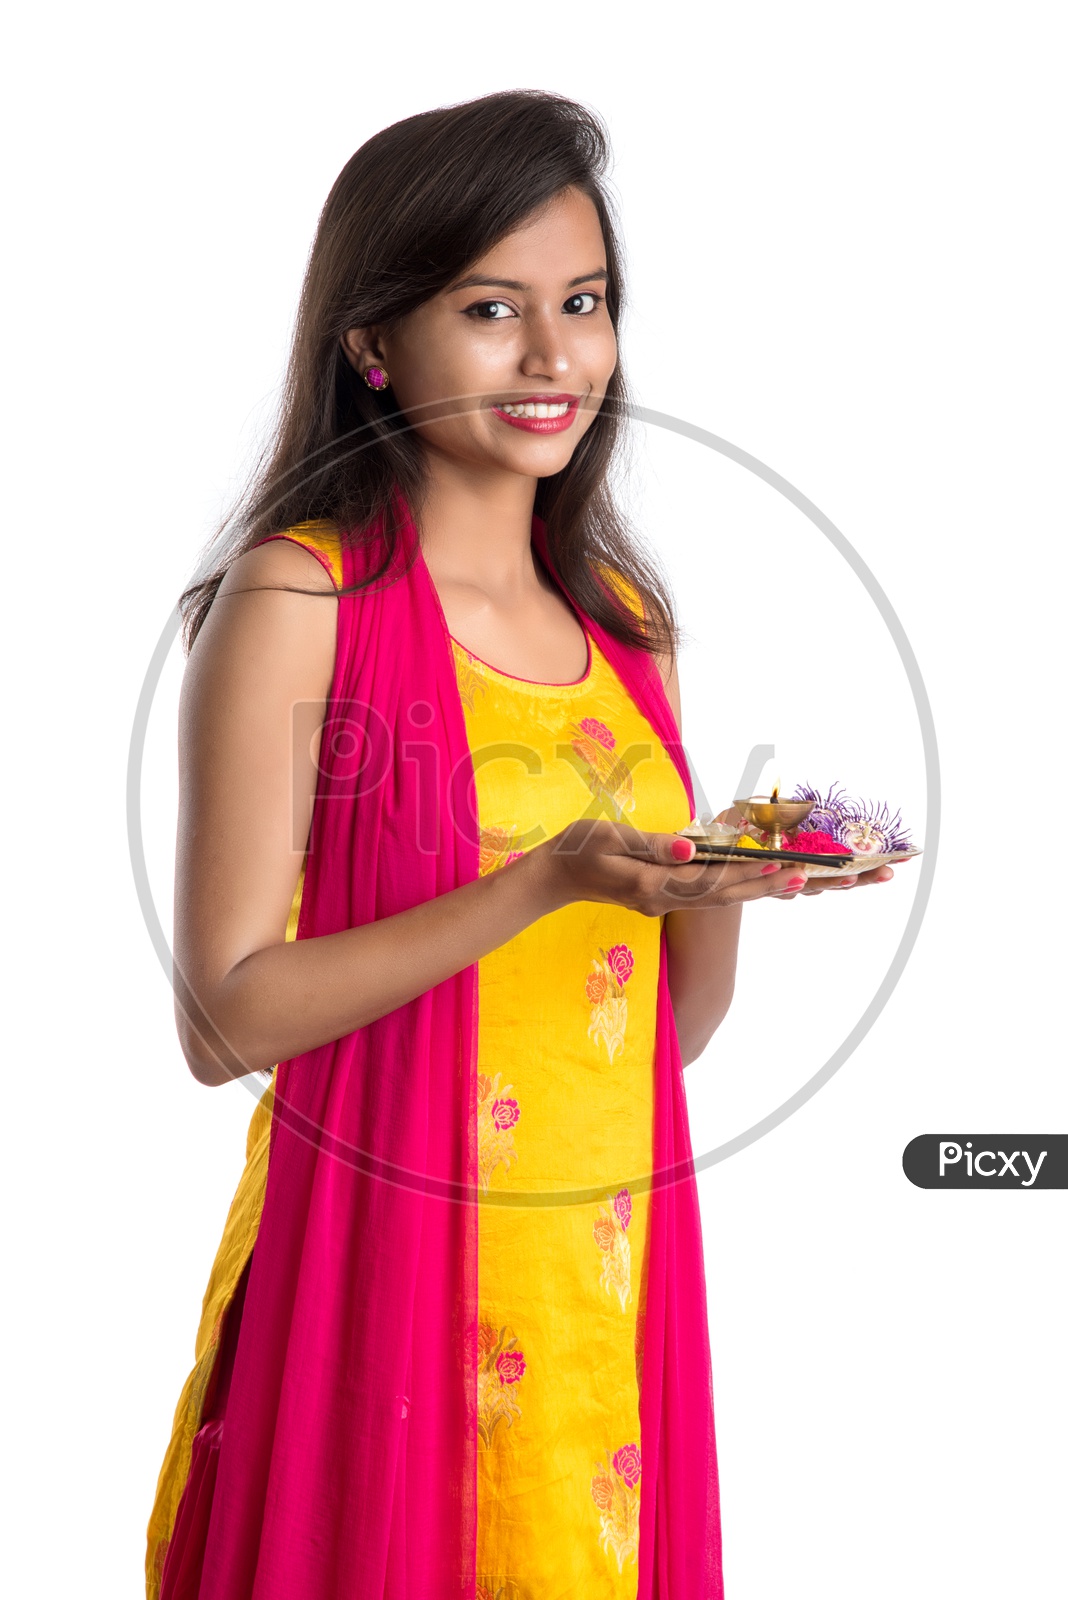 Beautiful Indian Girl Holding  Pooja Thali  Or Pooja Plate In Hand And Performing Worship